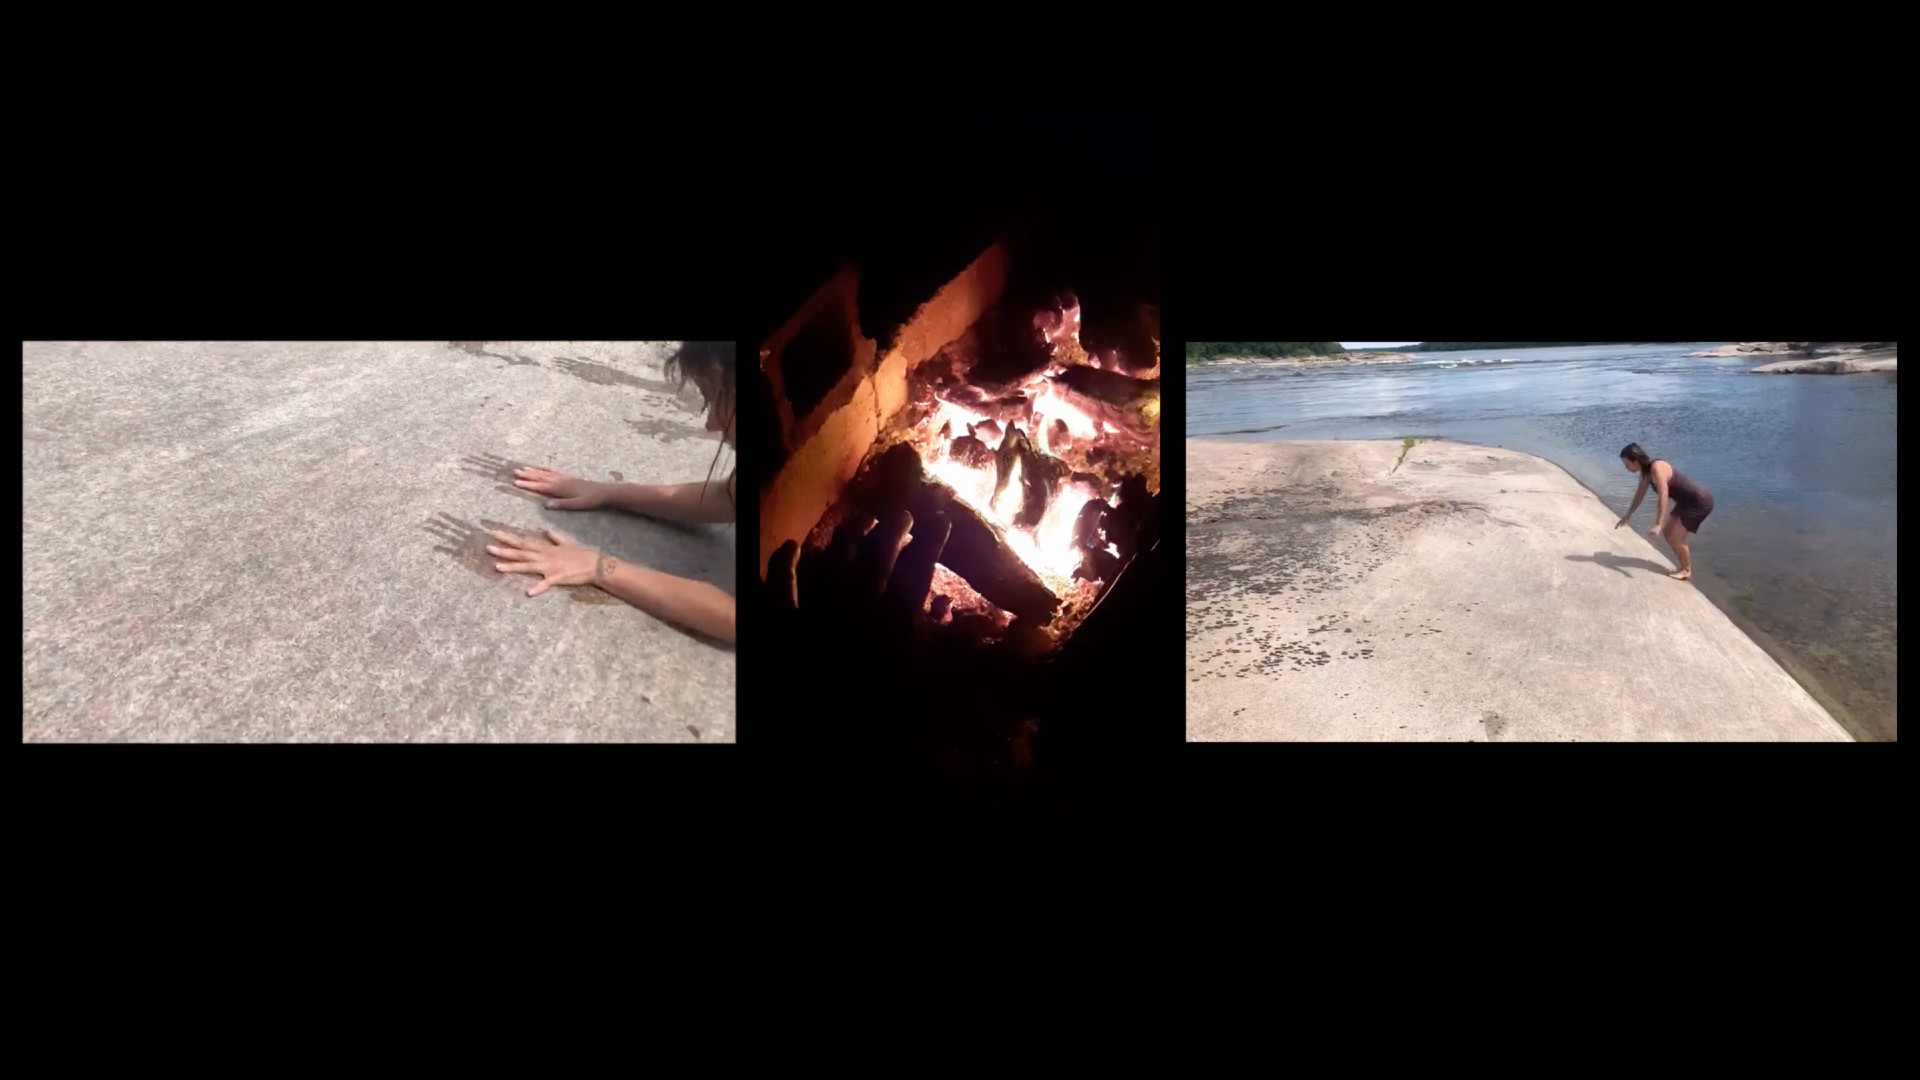 Three images on a black background. On the left there are two wet hand on rock, the middle image is of a fire, the last image is a woman walking out of the water.